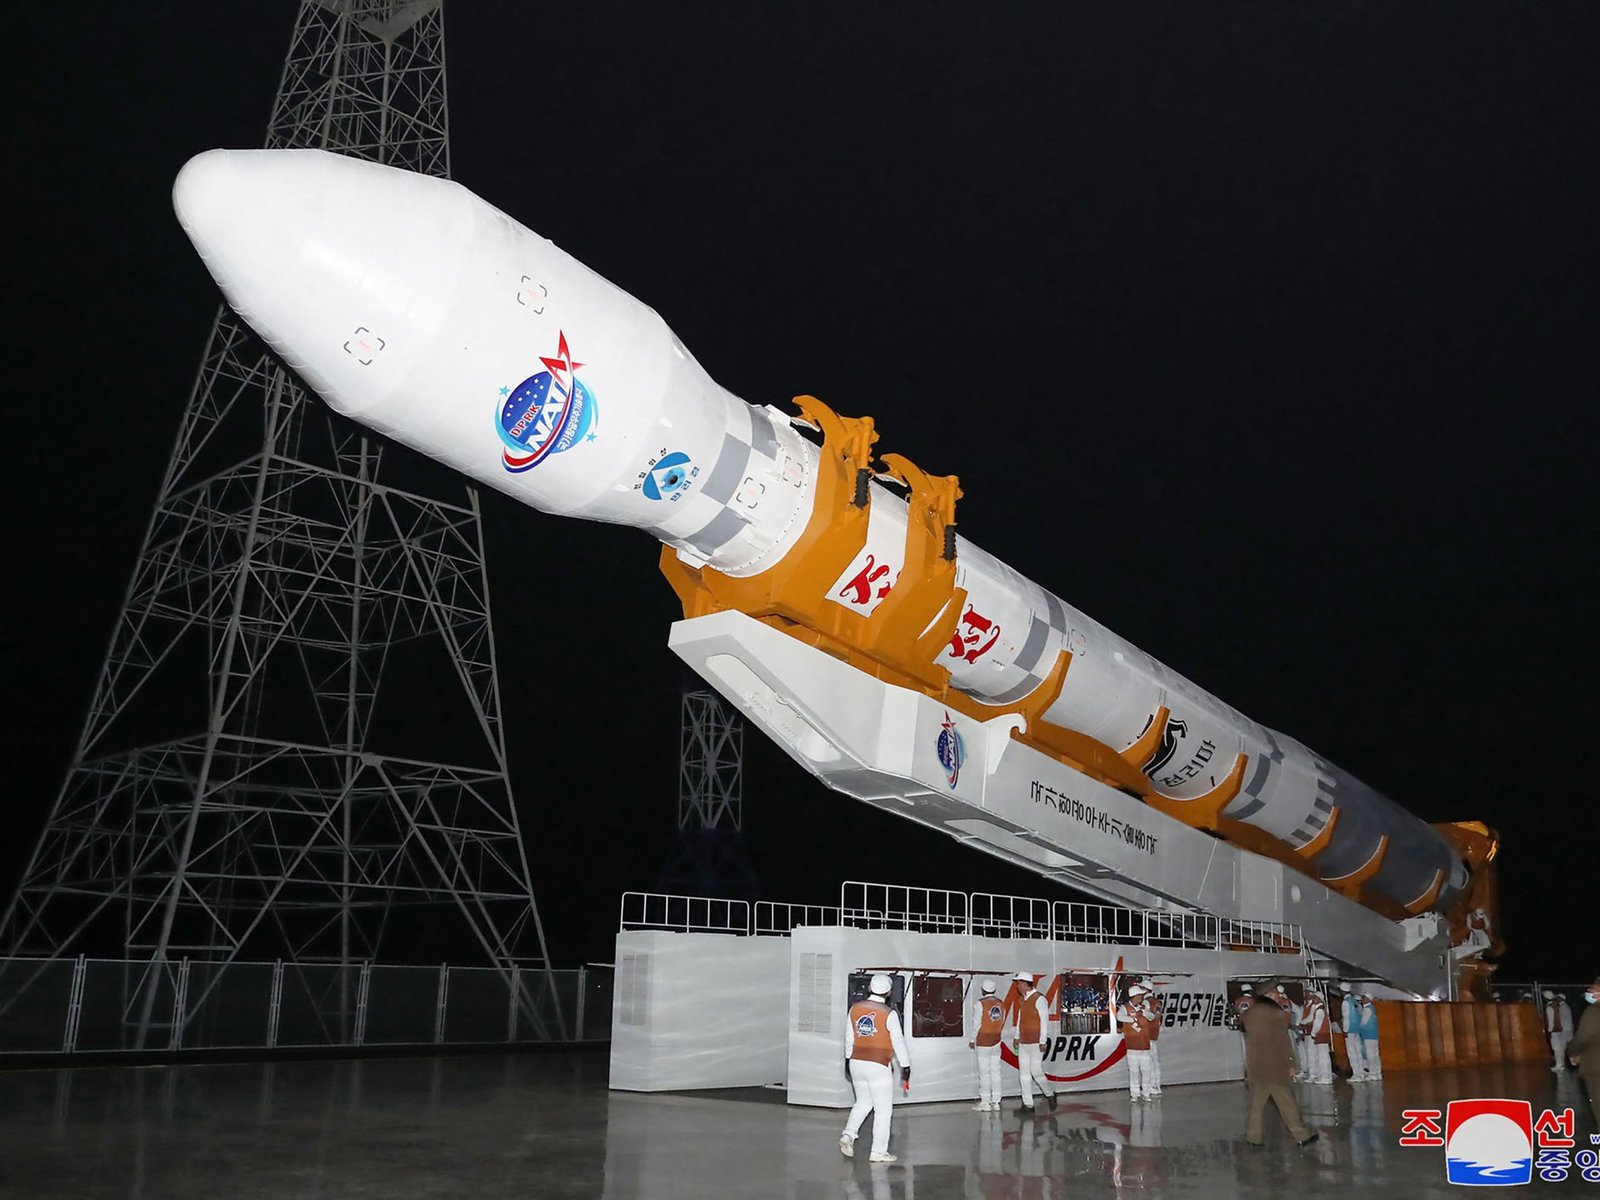 North Korea plans to launch space satellite by June 4 Japan | Weapons News